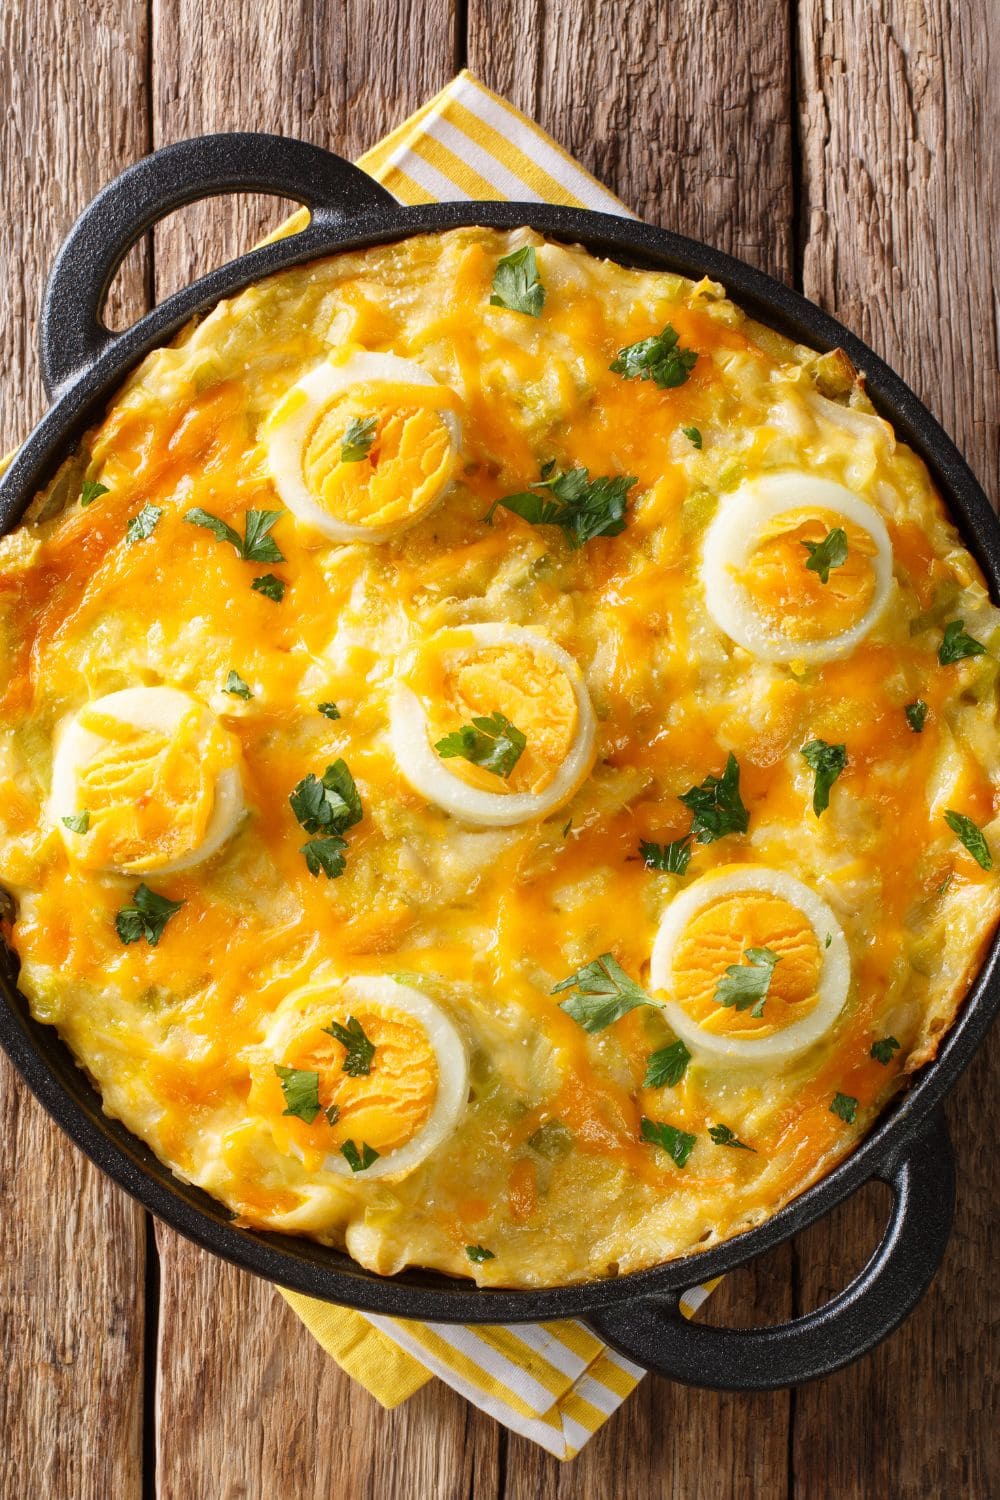 Homemade Egg Casserole with Potatoes and Cheese